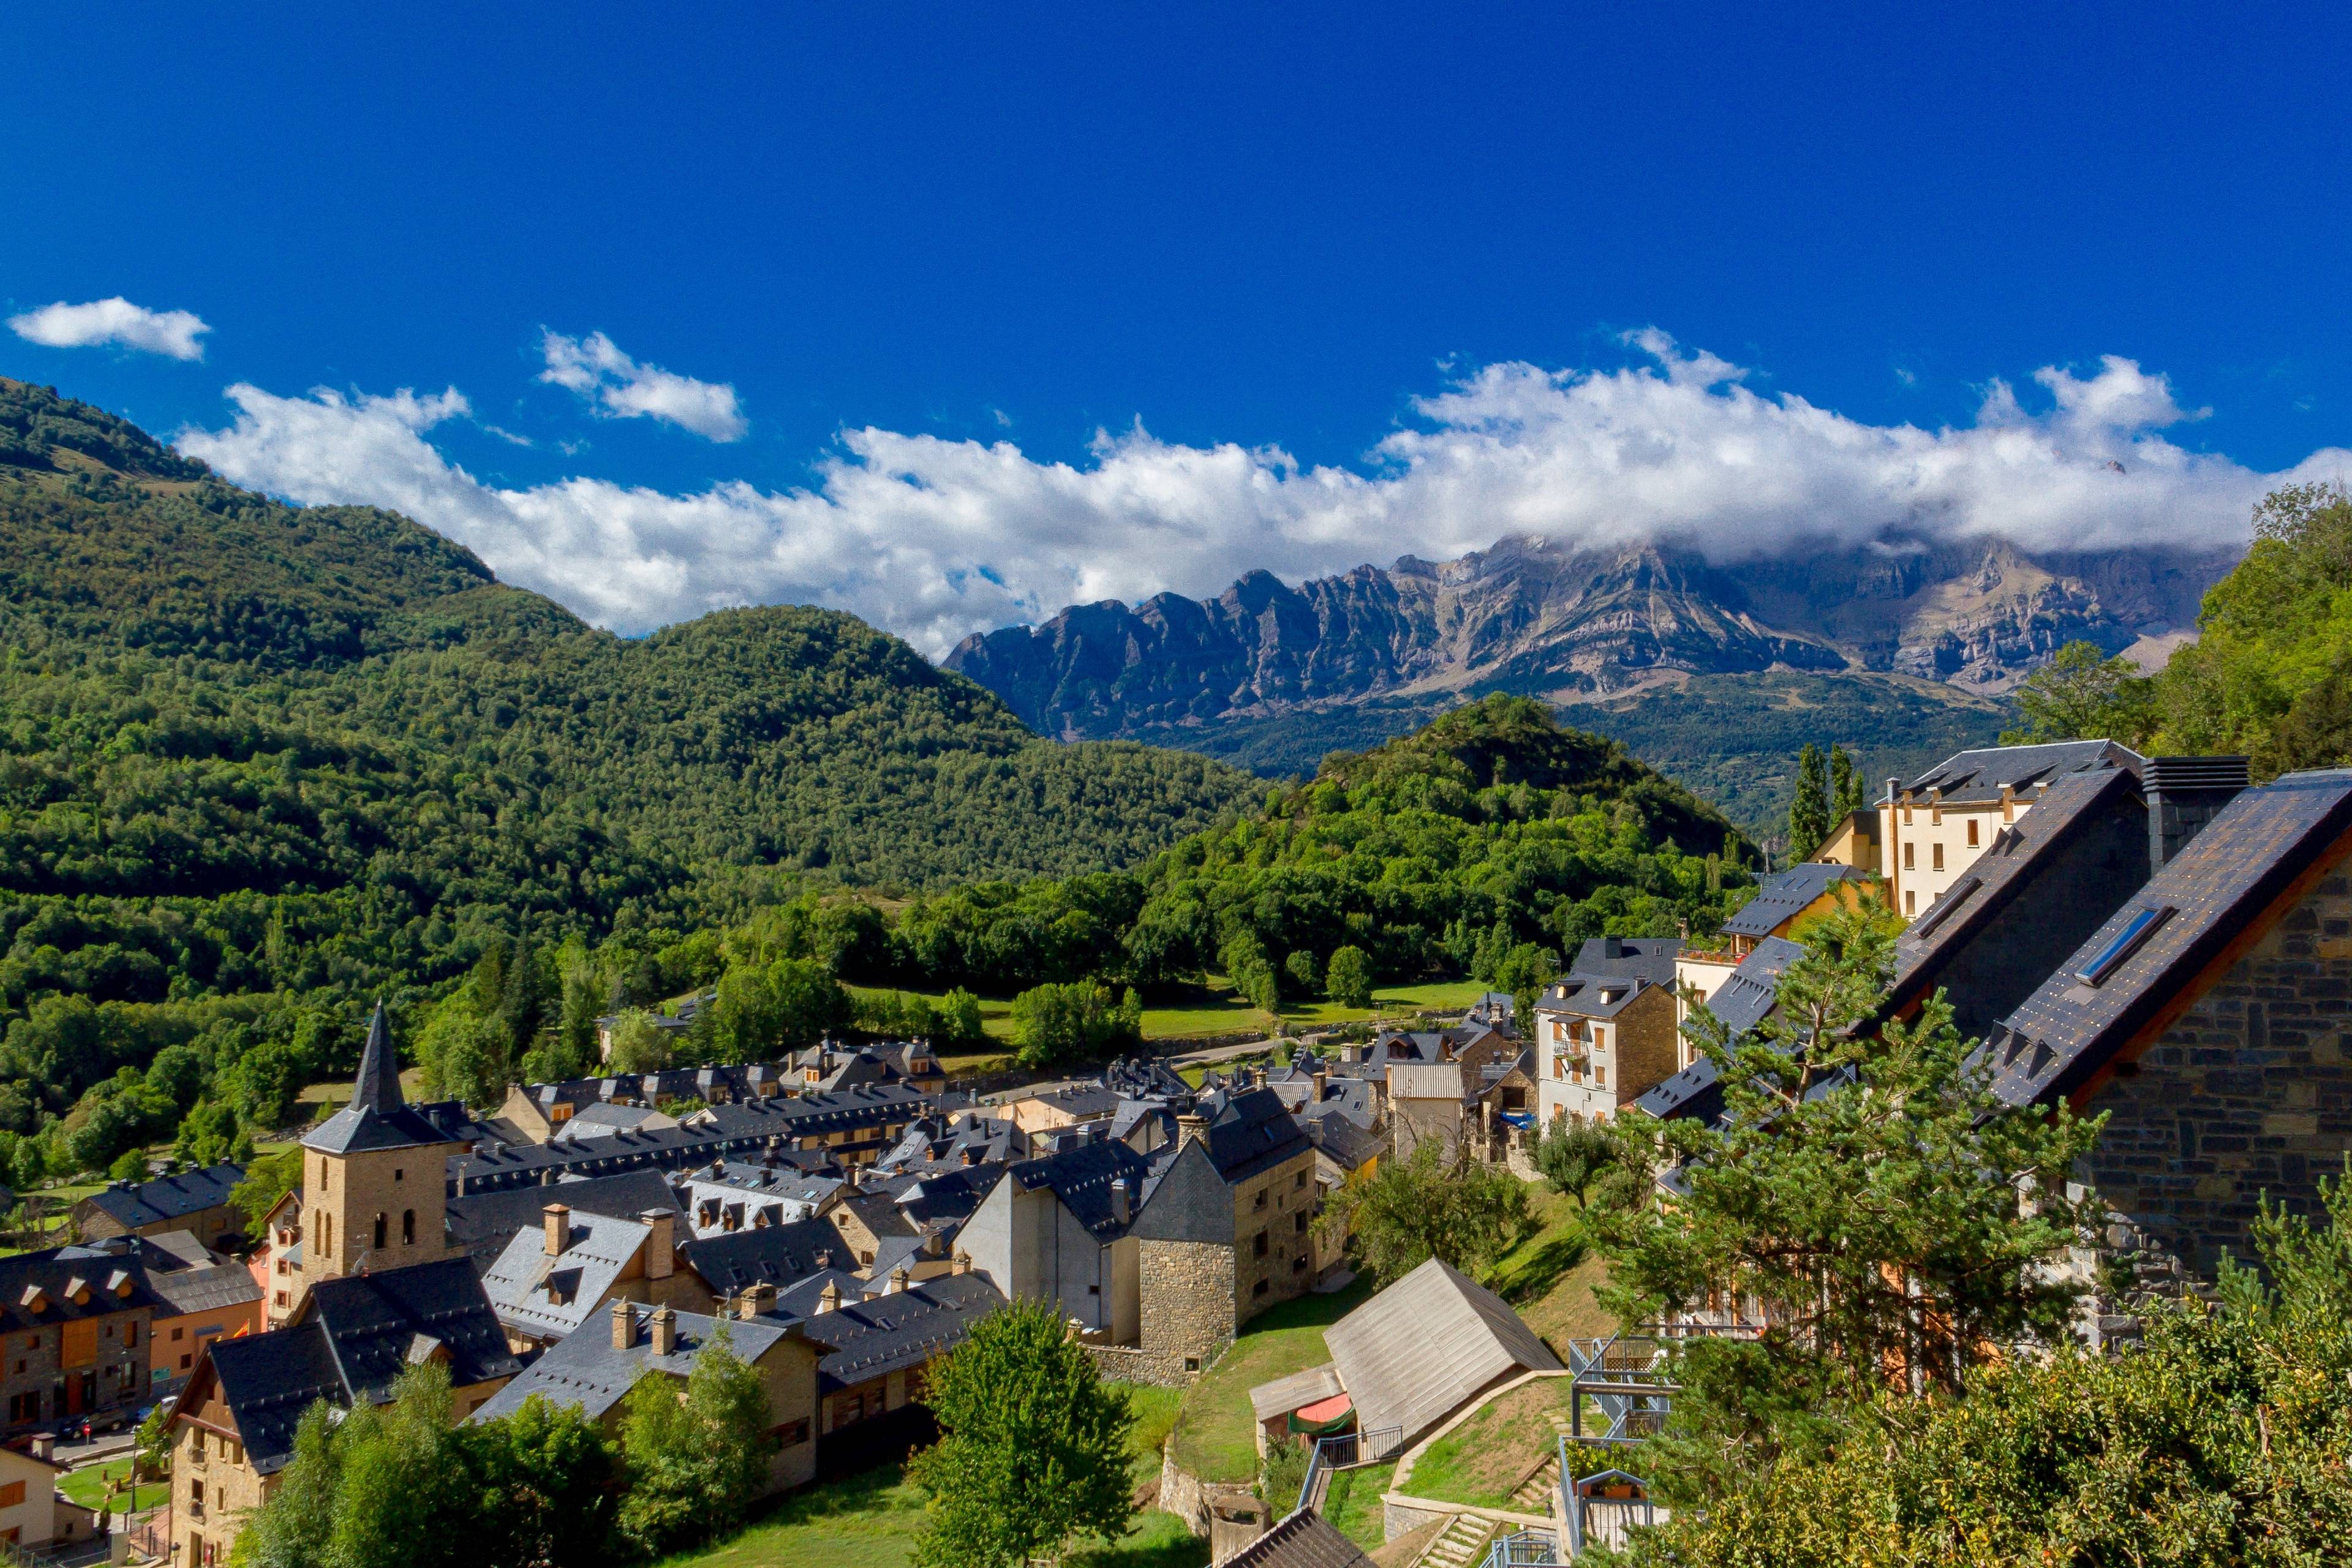 Tena Valley: One of the Most Stunning Valleys in the Pyrenees